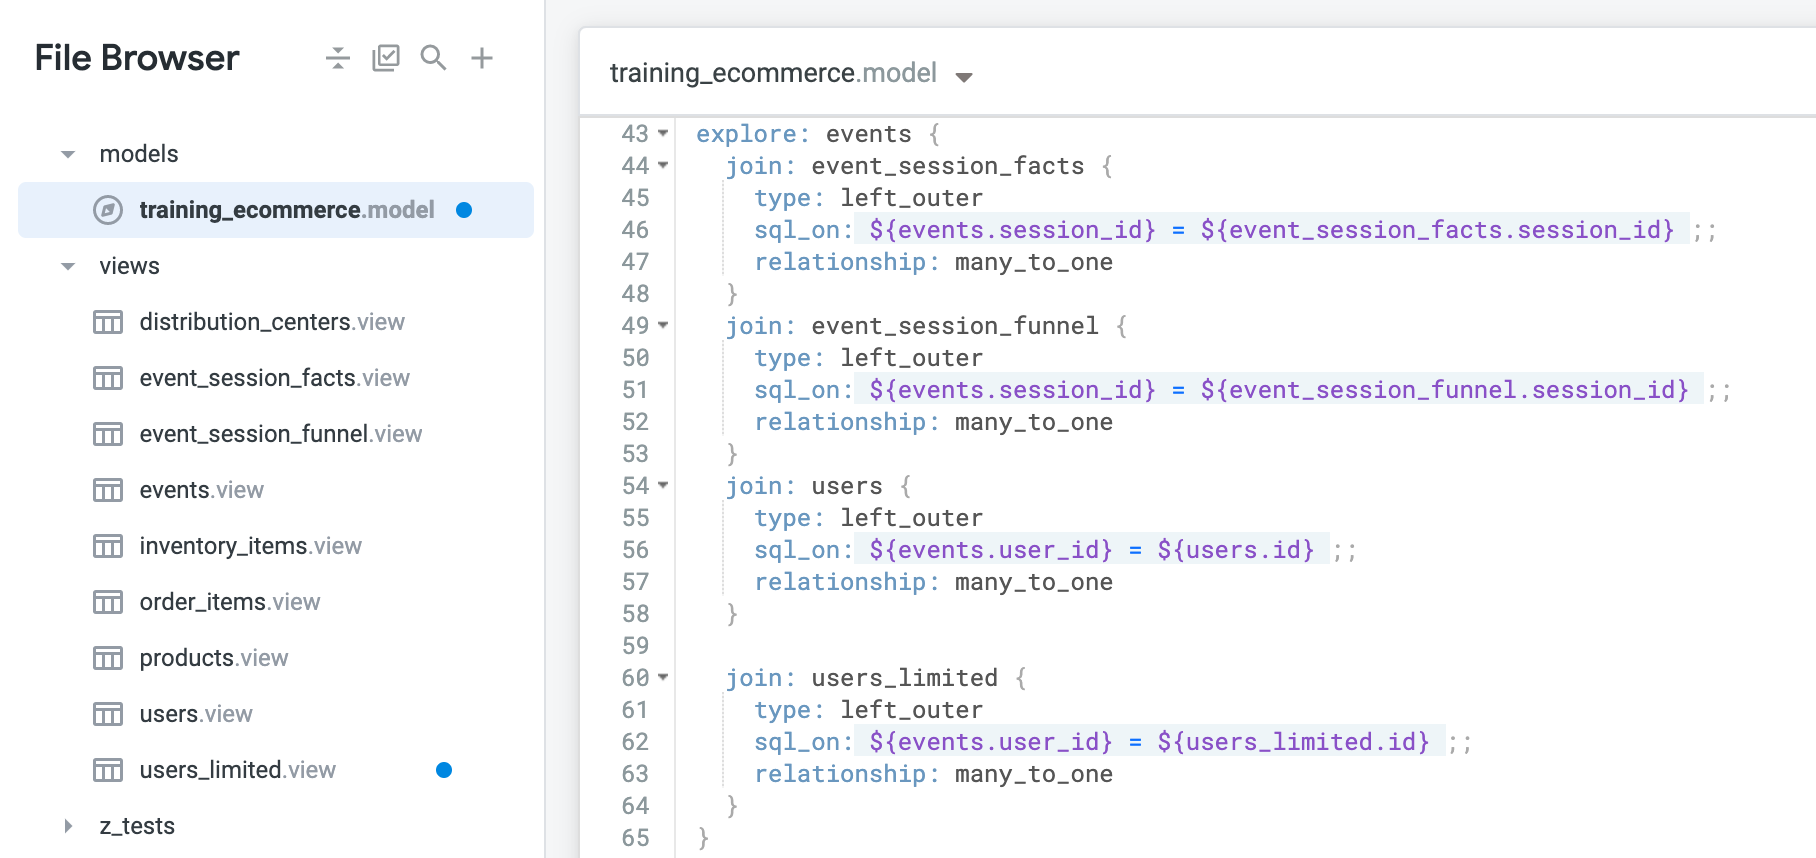 training_ecommerce.model tabbed page open in the File Browser